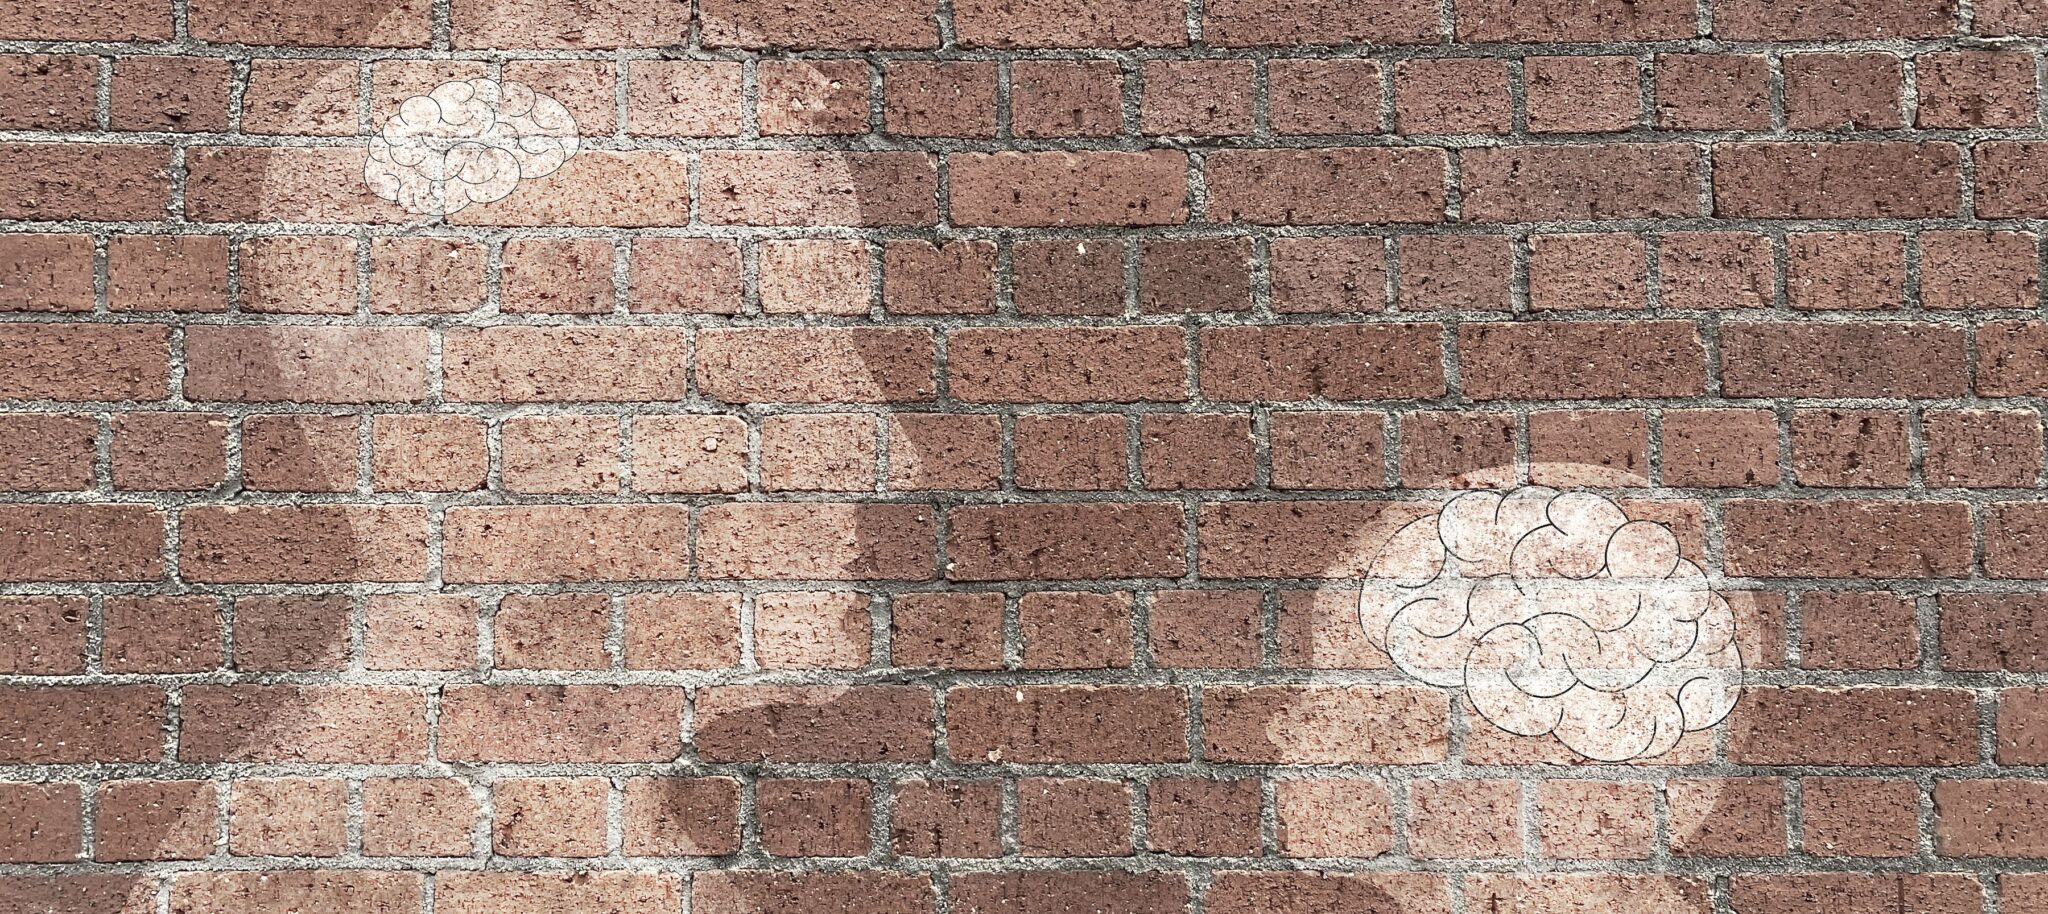 As one ages the brain becomes smaller, illustration of an adult and a child on a brick wall